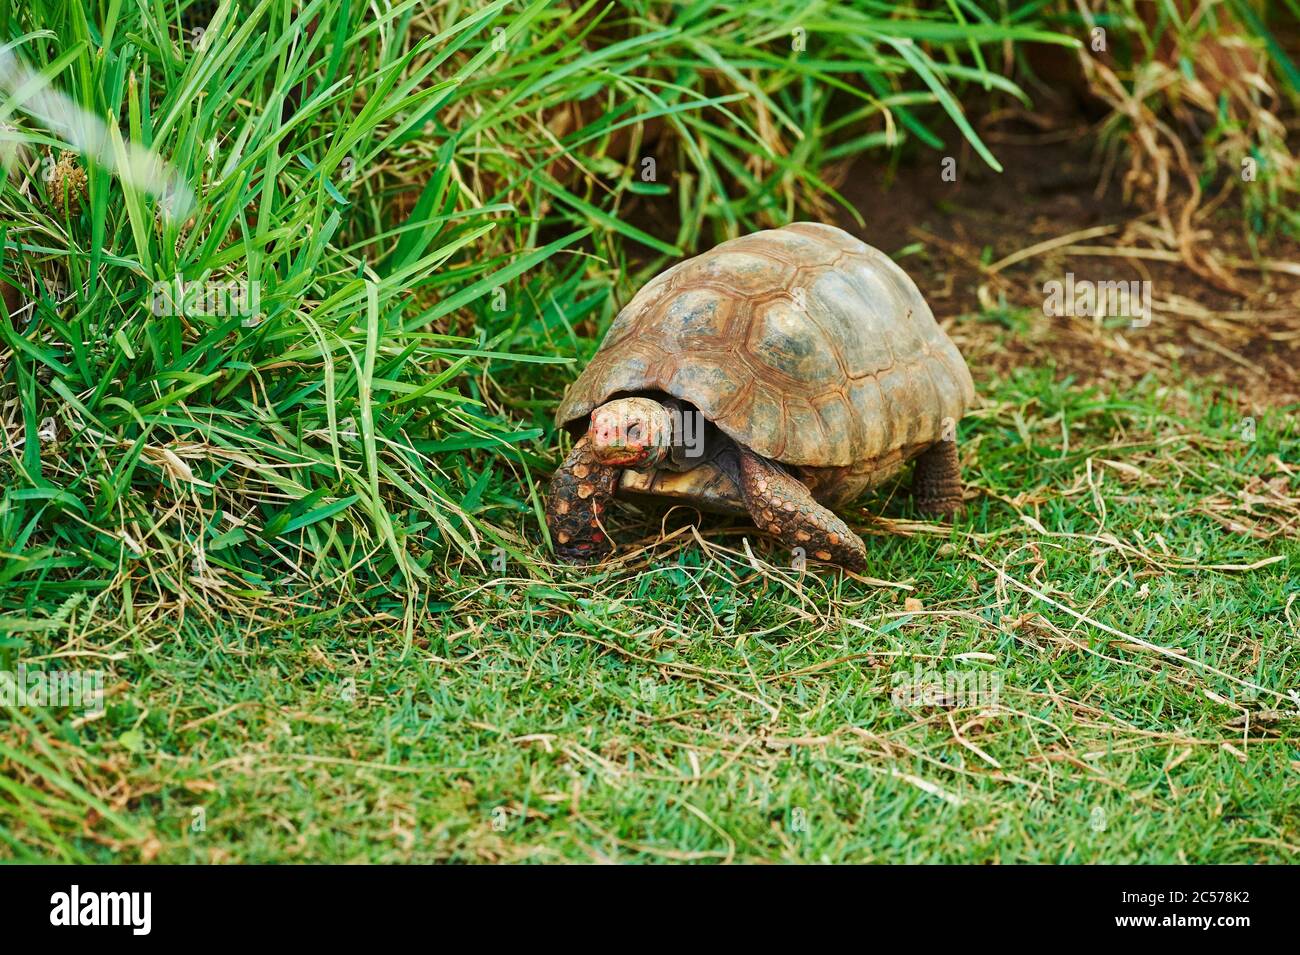 Brown tortoise or brown tortoise (Manouria emys) in a meadow, animal portrait, captive, Hawaii, USA Stock Photo